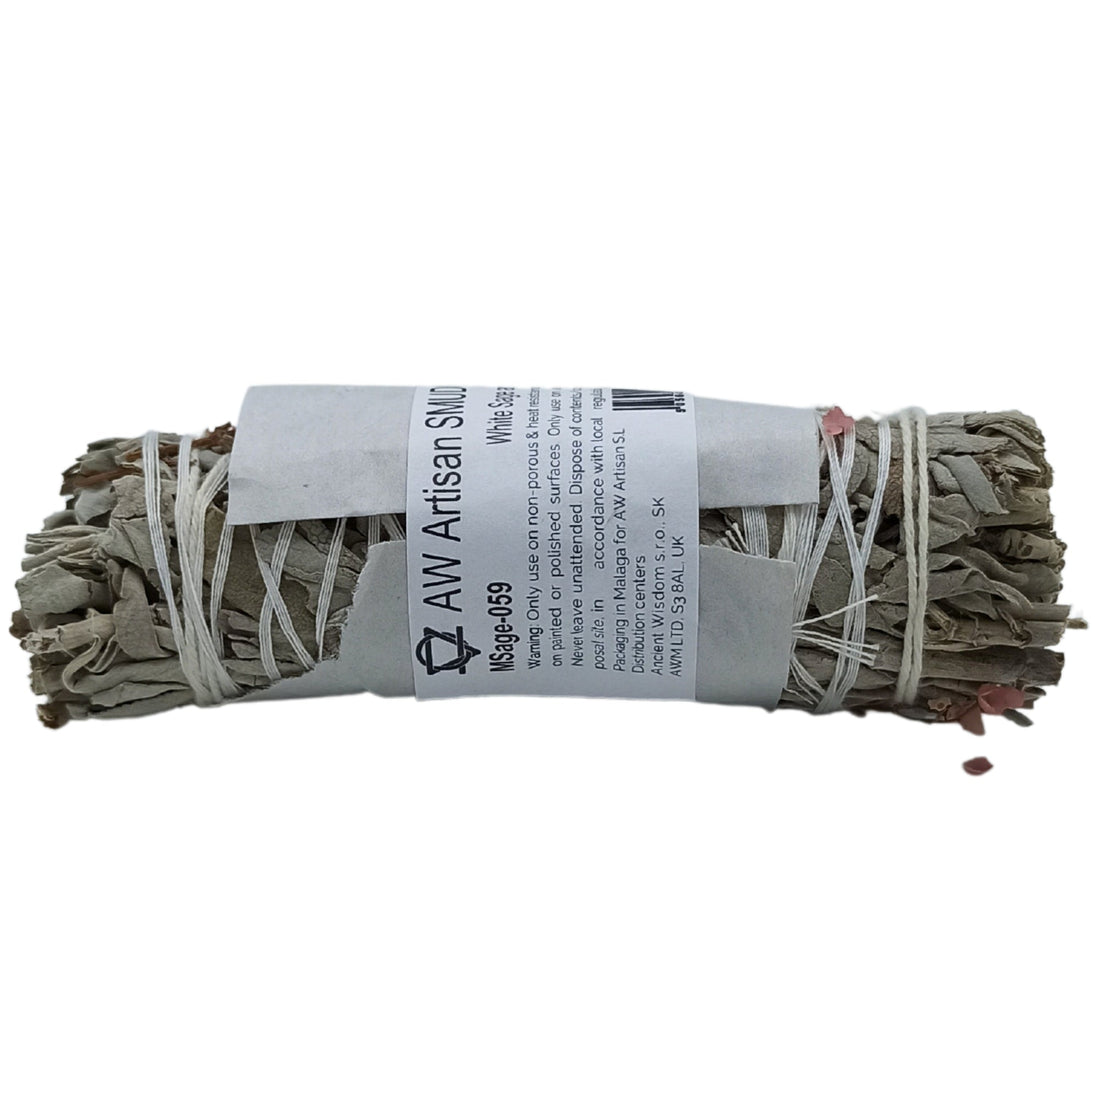 Smudge Stick - White Sage and Pirul Seed - best price from Maltashopper.com MSAGE-59